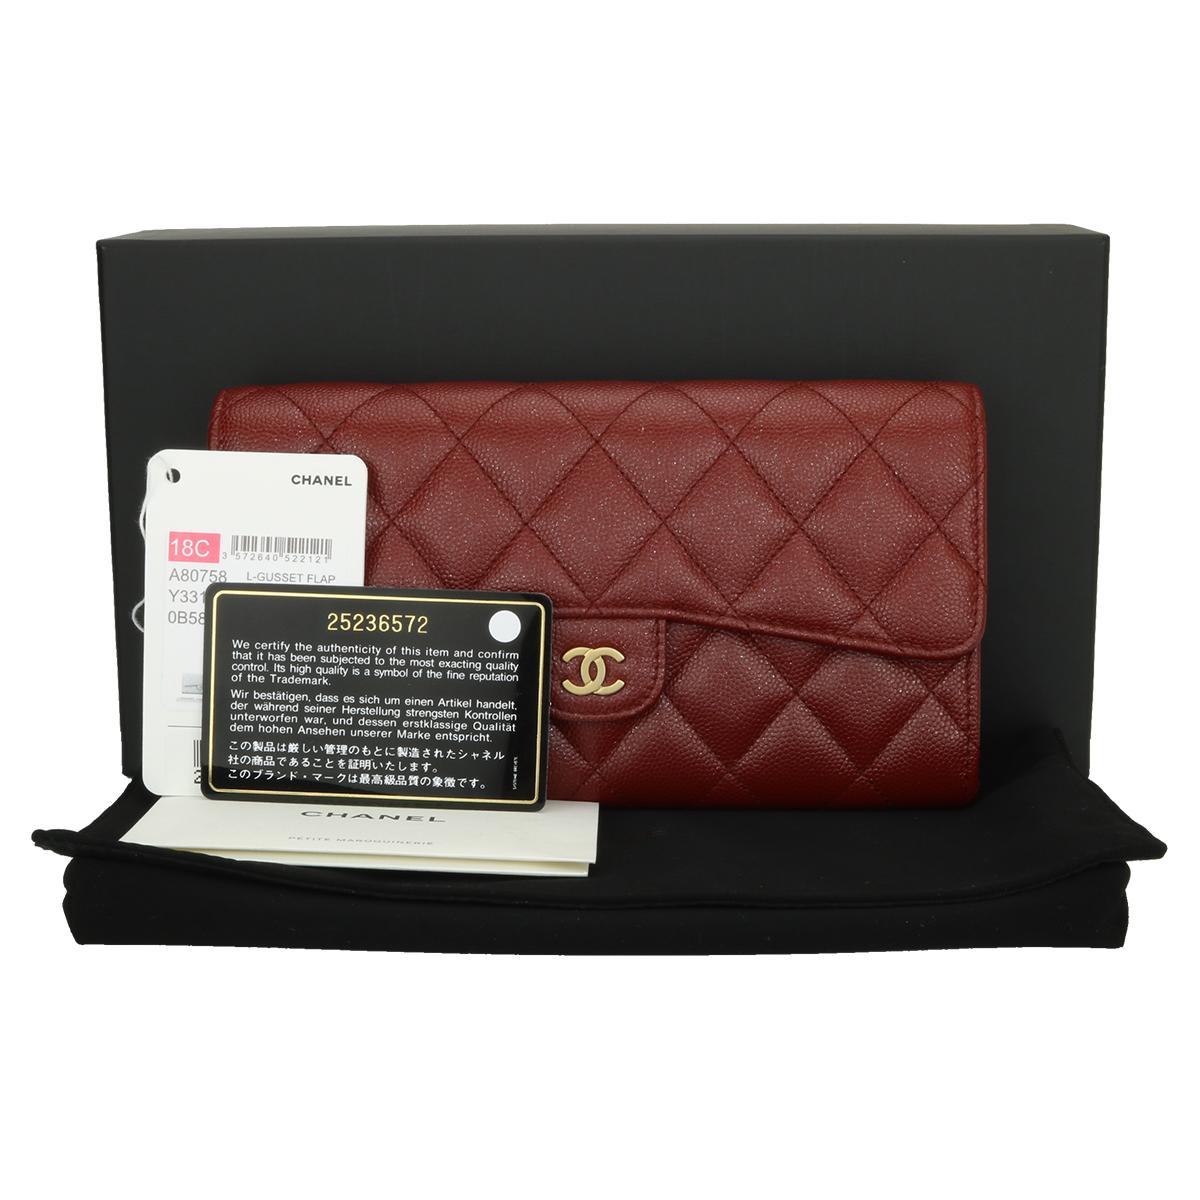 Authentic CHANEL Long Flap Wallet Burgundy Caviar Iridescent with Brushed Gold Hardware 2018.

This stunning wallet is in brand new condition with tag attached. Extremely difficult to find, and completely sold out everywhere!

Exterior Condition: